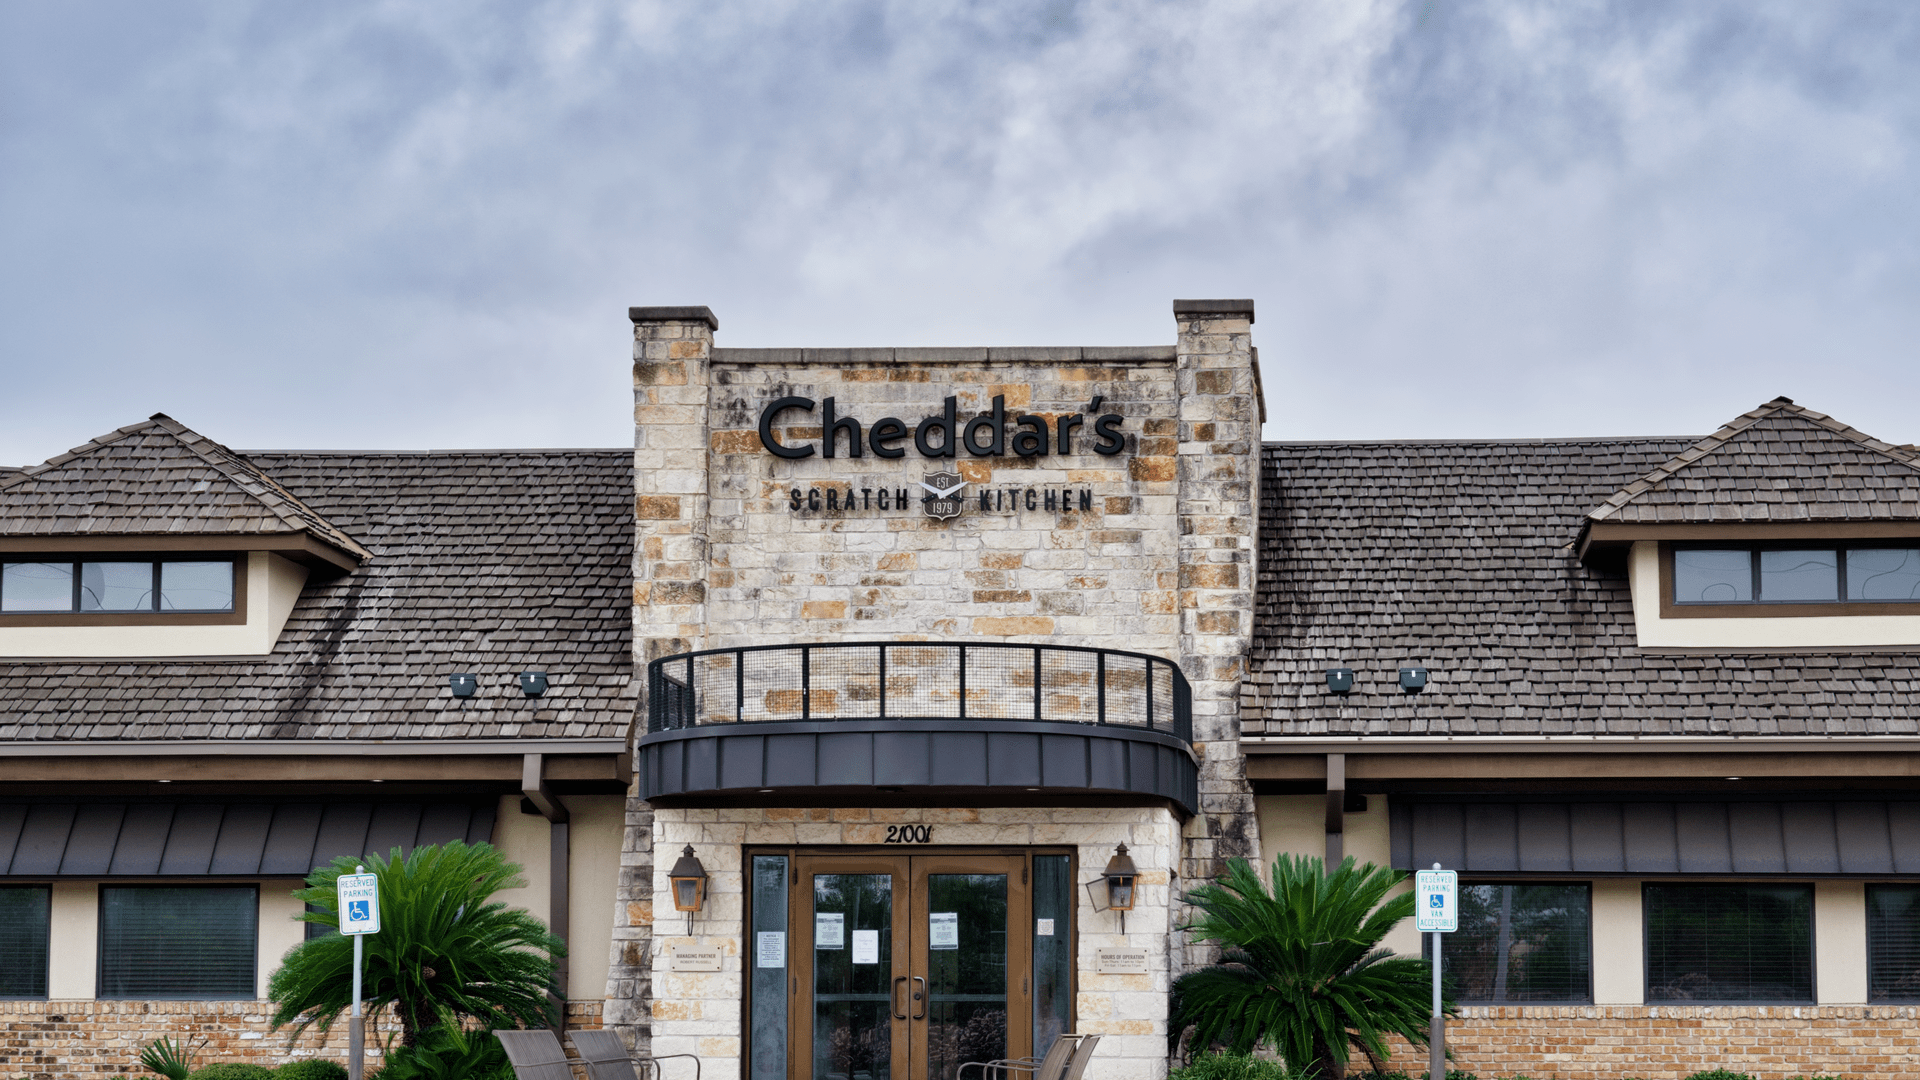 Cheddars Scratch Kitchen Featured Image 